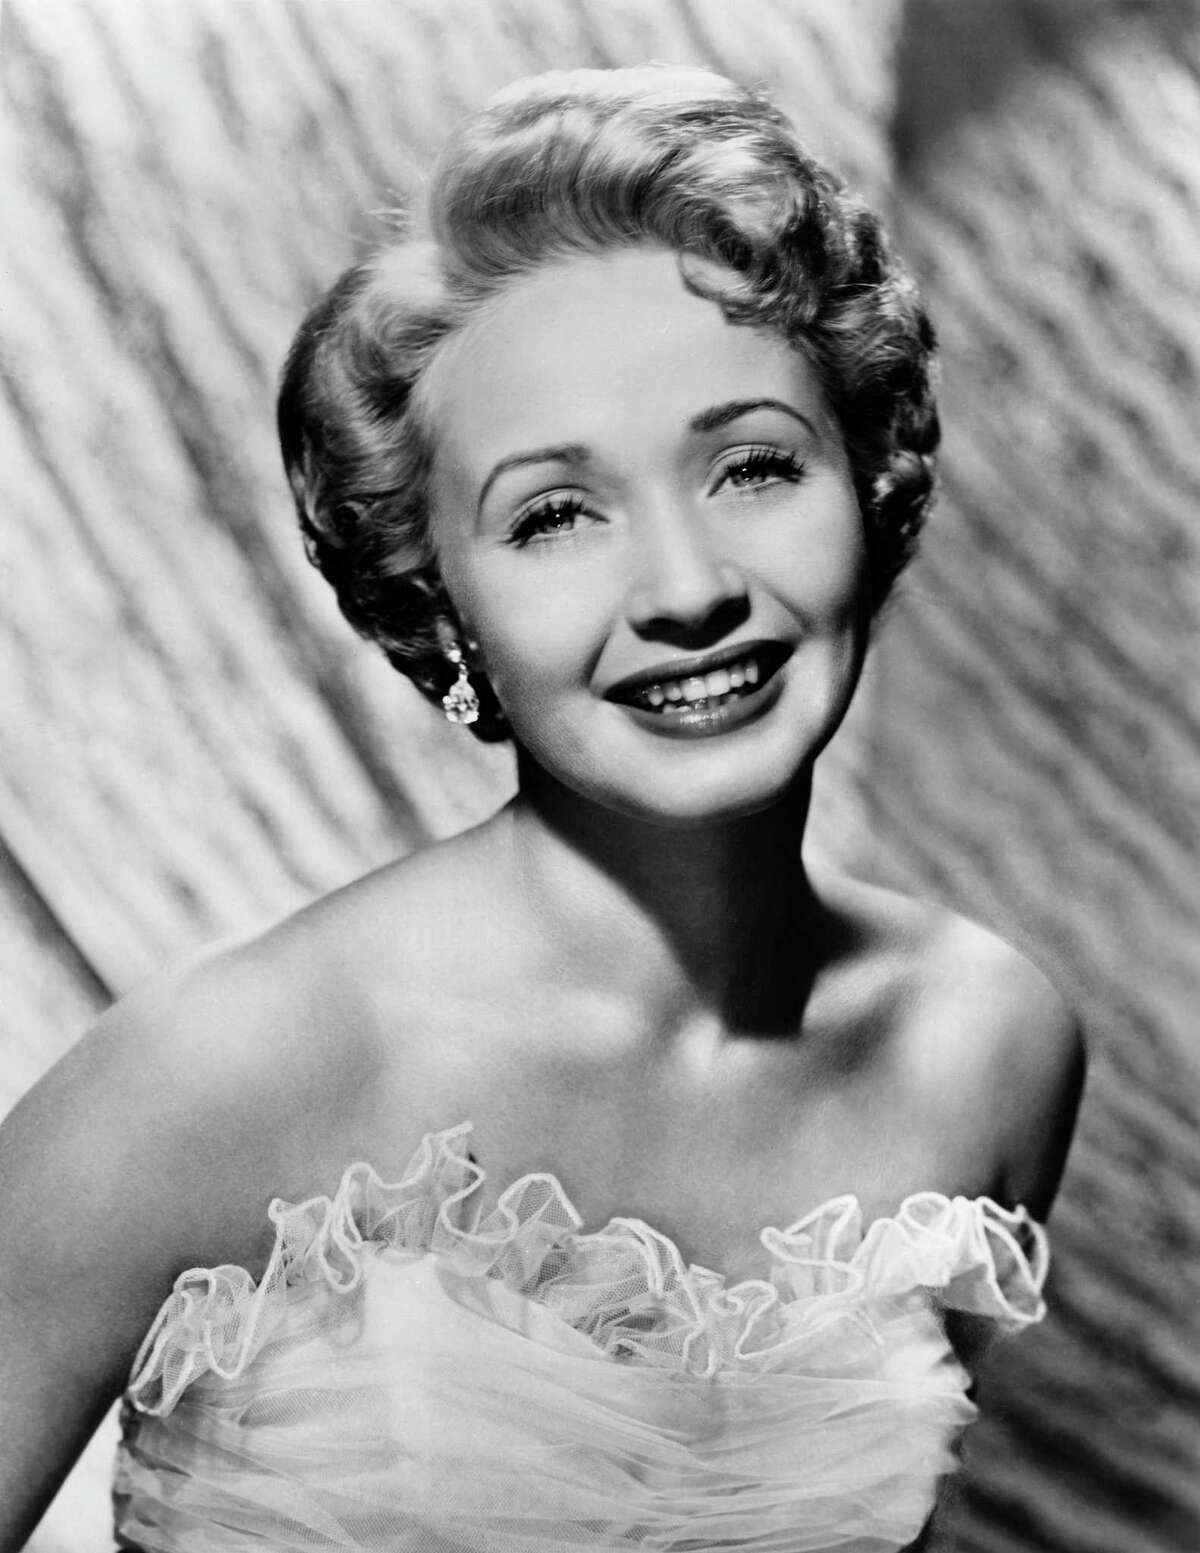 Actress Jane Powell, who lives in Wilton, made her film debut in 1944. In her early days at MGM, she attended school on the studio lot with other young actors, including Debbie Reynolds and Elizabeth Taylor.